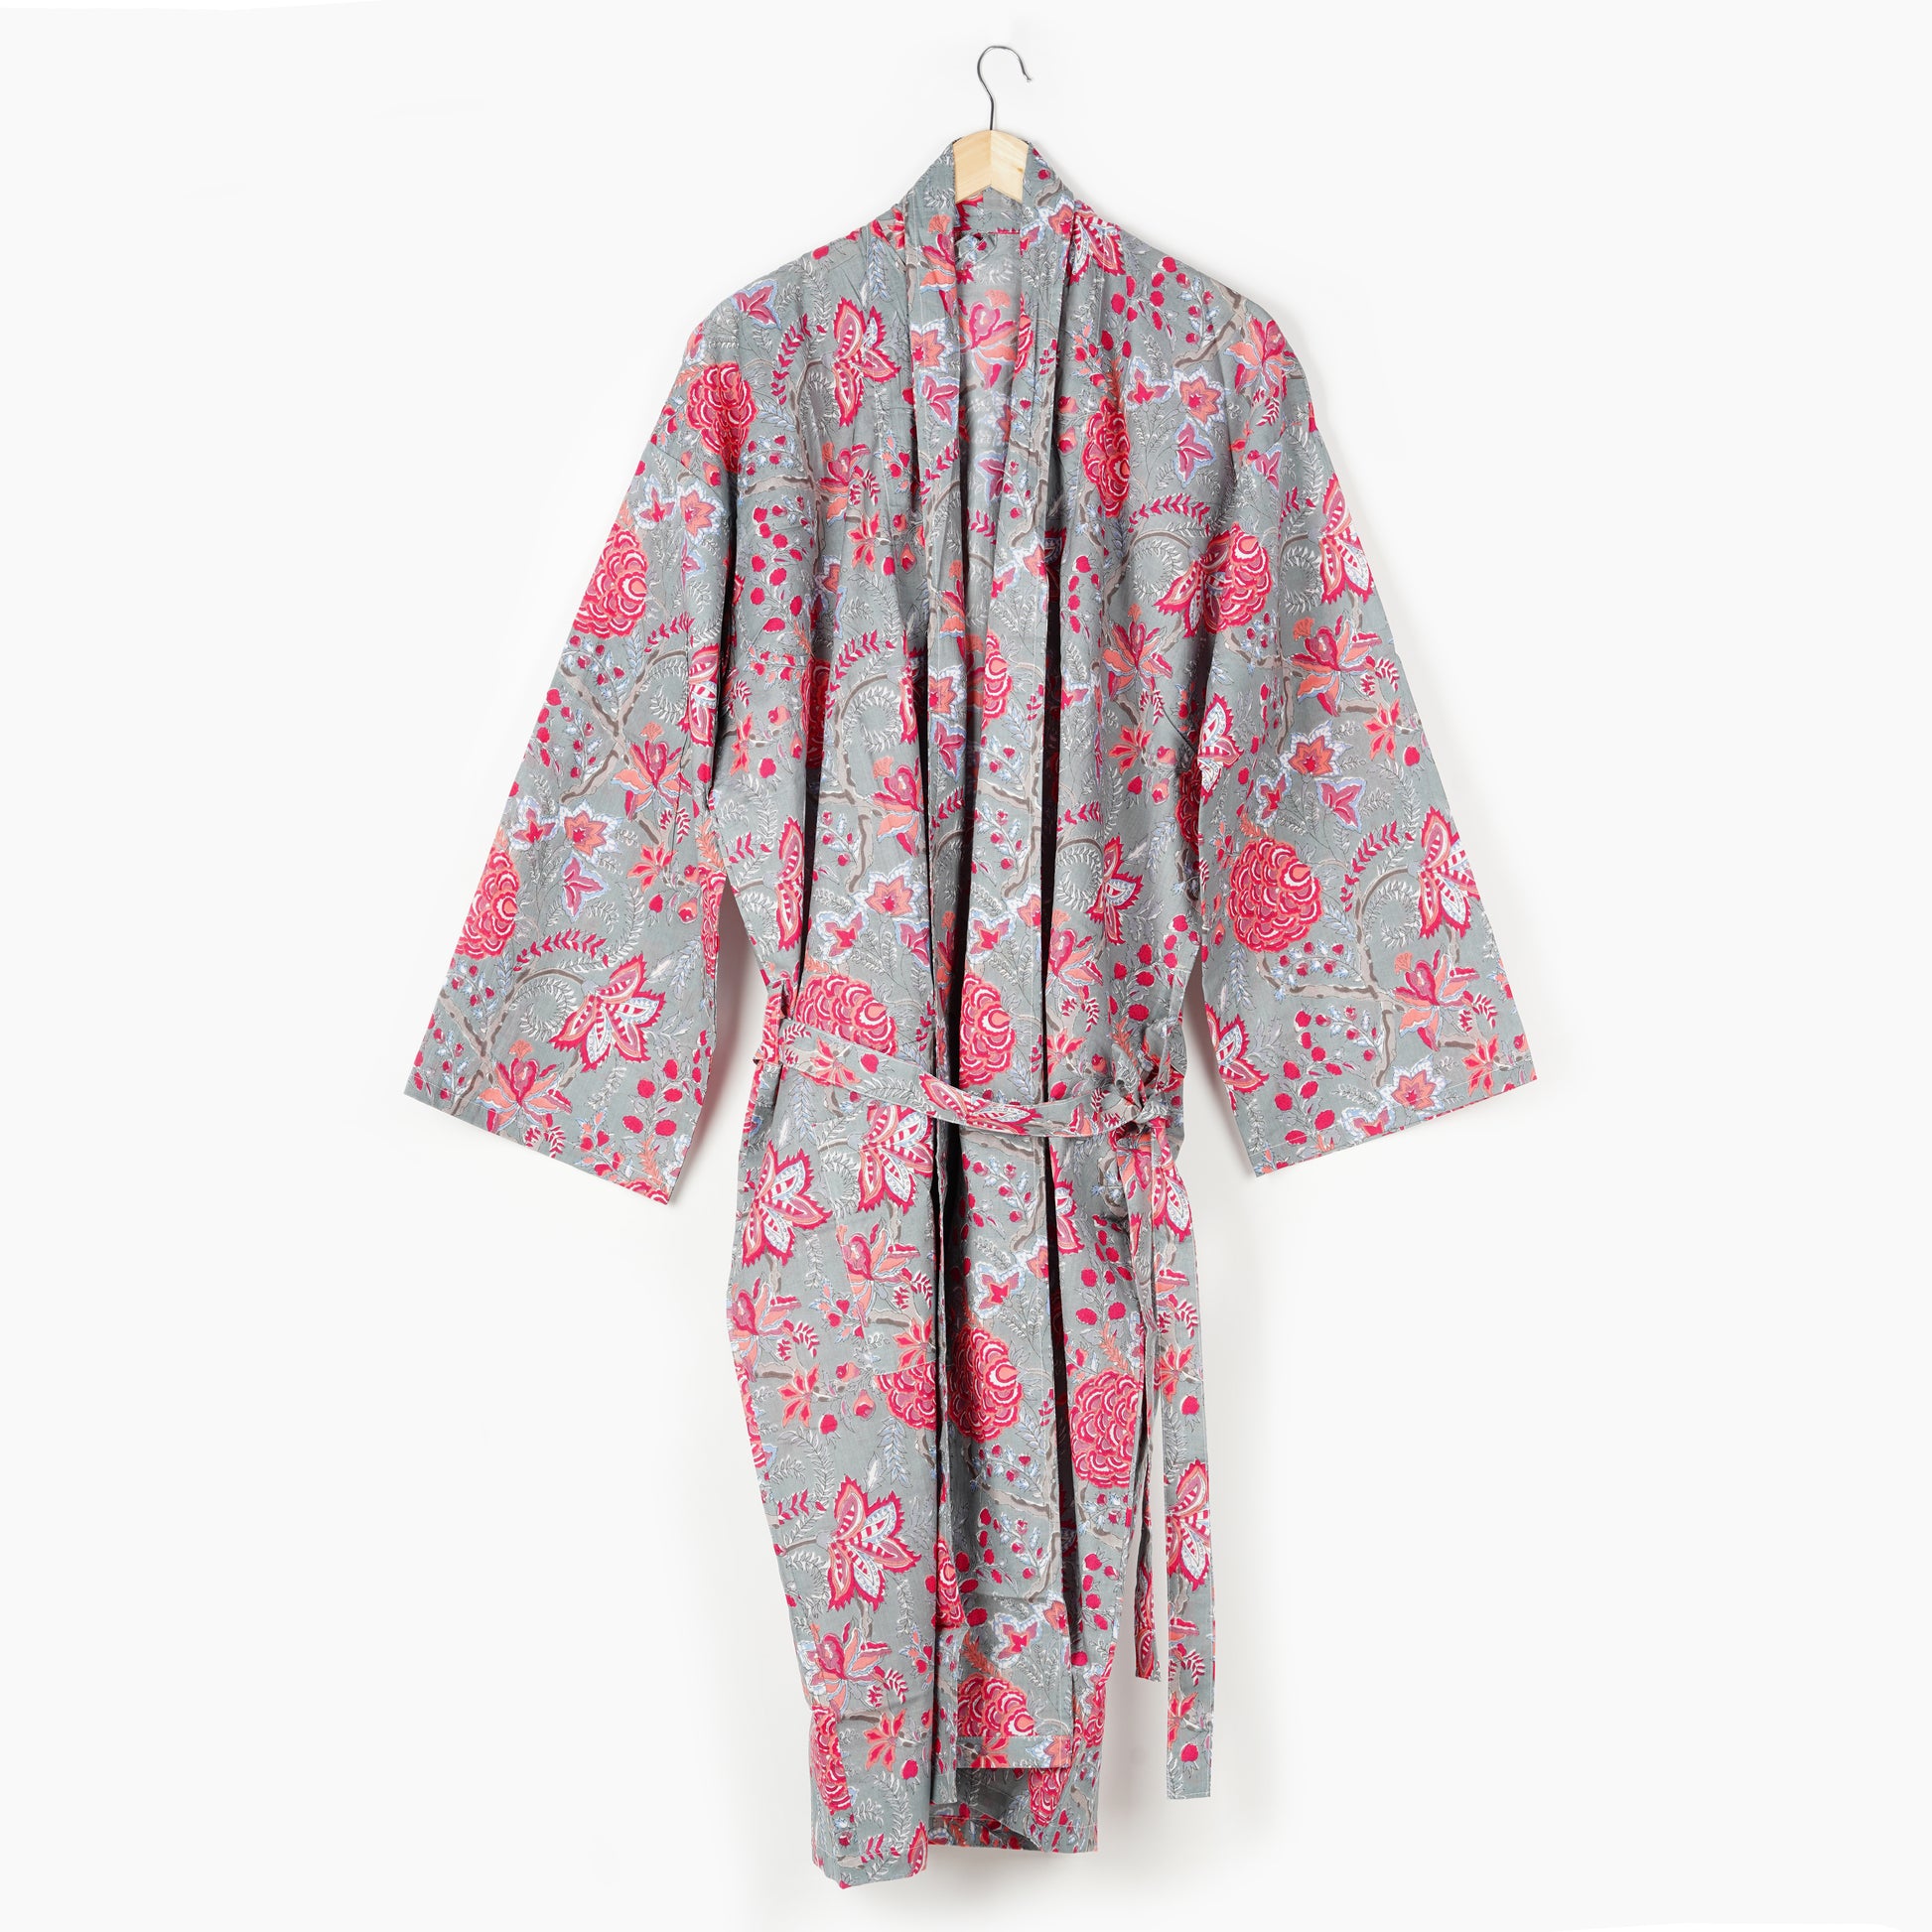 Kimono Bath Robes/ Night Suit -DS19 - The Teal Thread